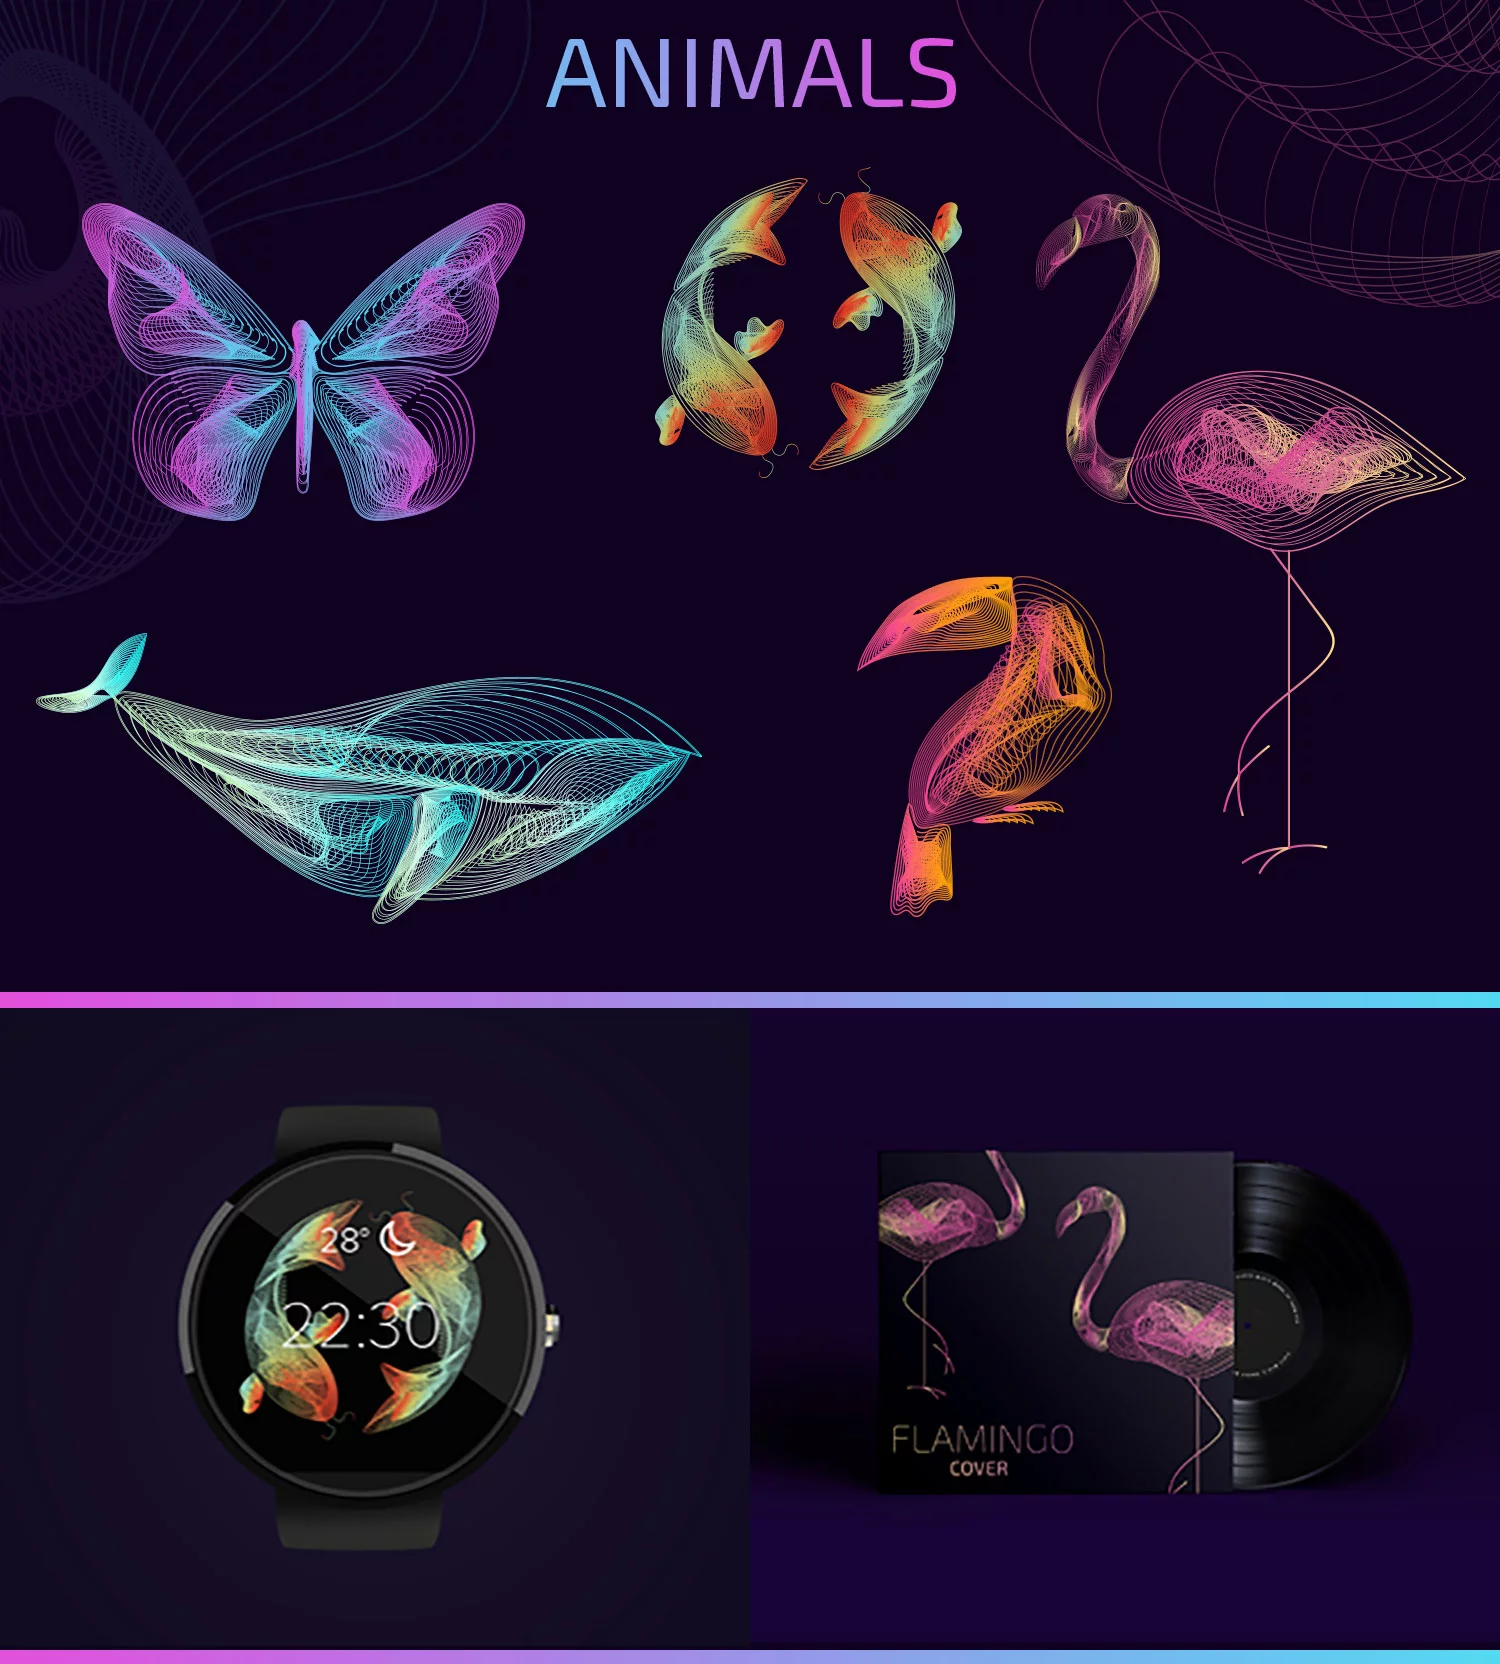 Free Vector Linear Animals and Objects + Premium Version